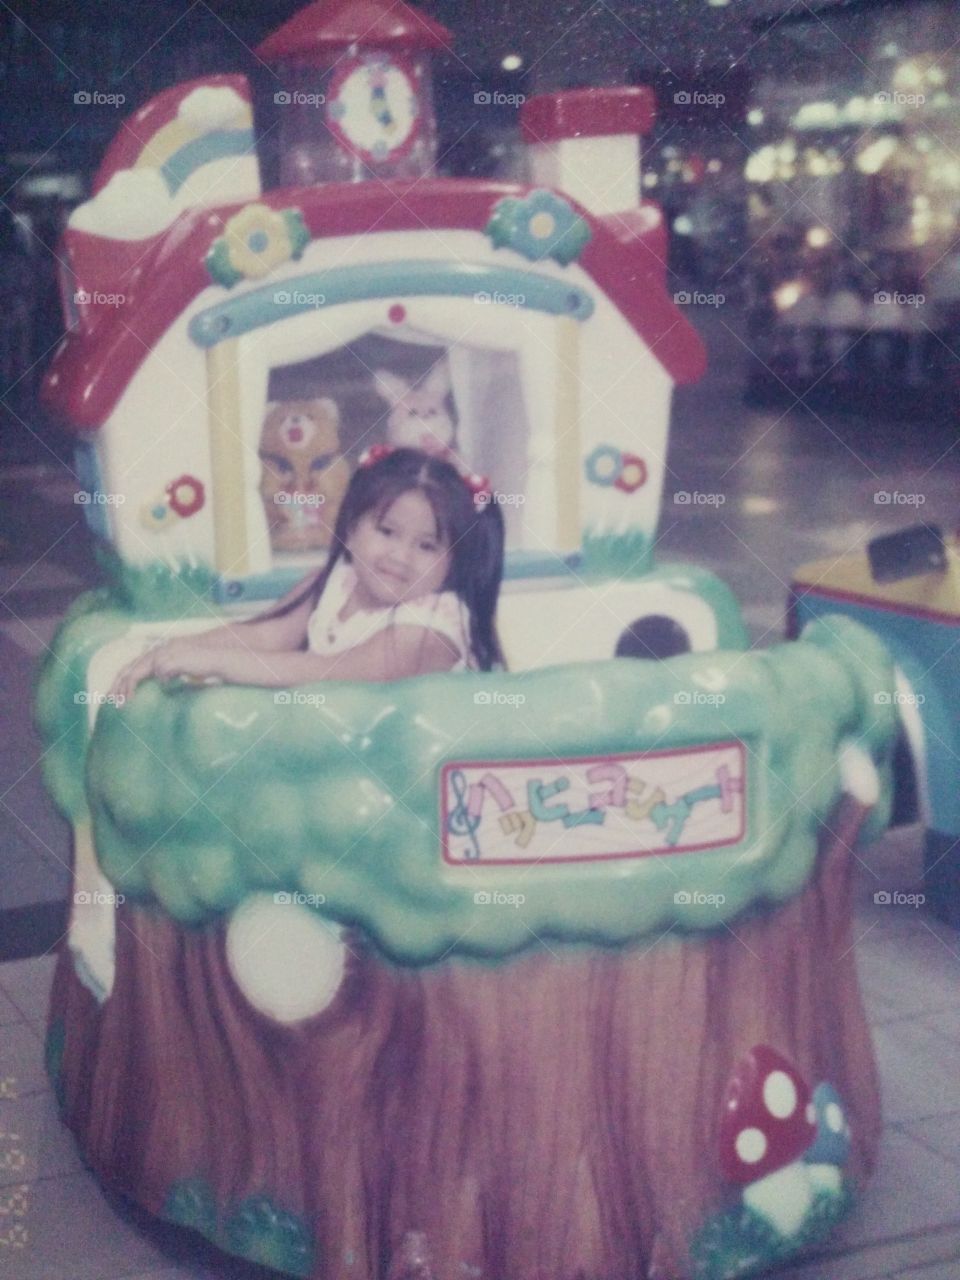 In my own crib... I loved playing in malls that had things like these.